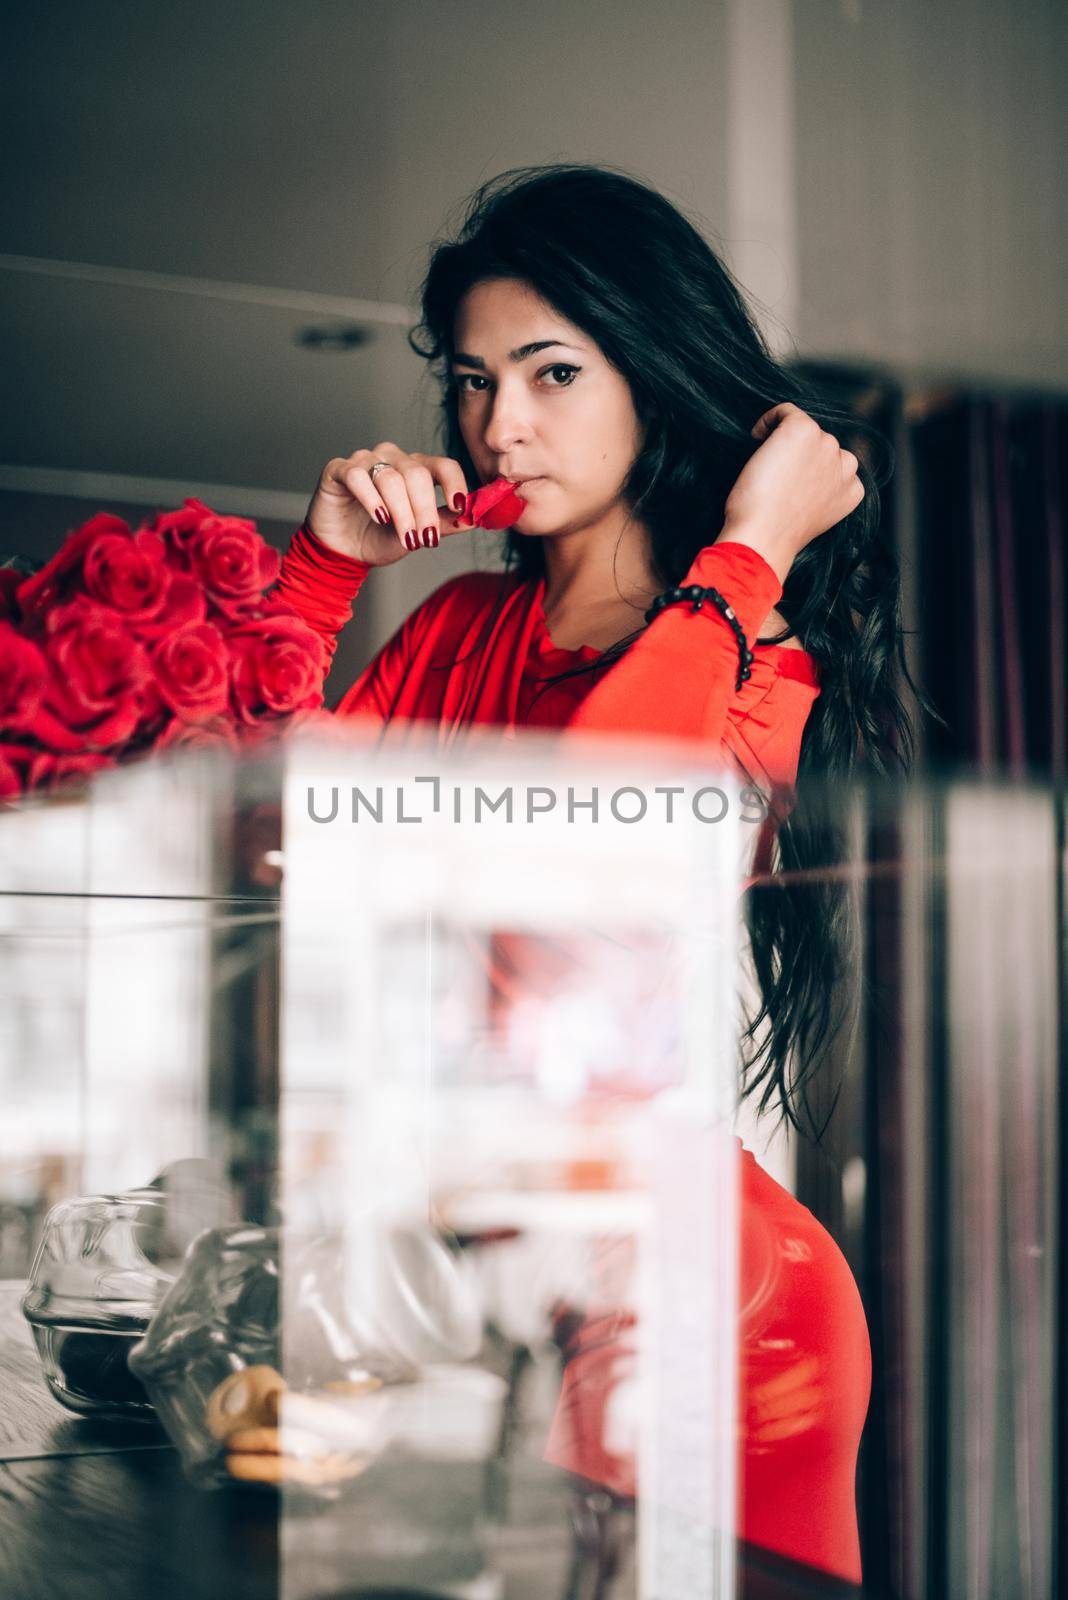 Charming young woman in red sexy dress posing with a bouquet of red roses. photo of a seductive woman with black hair. Selective focus, filmgrain by Ashtray25